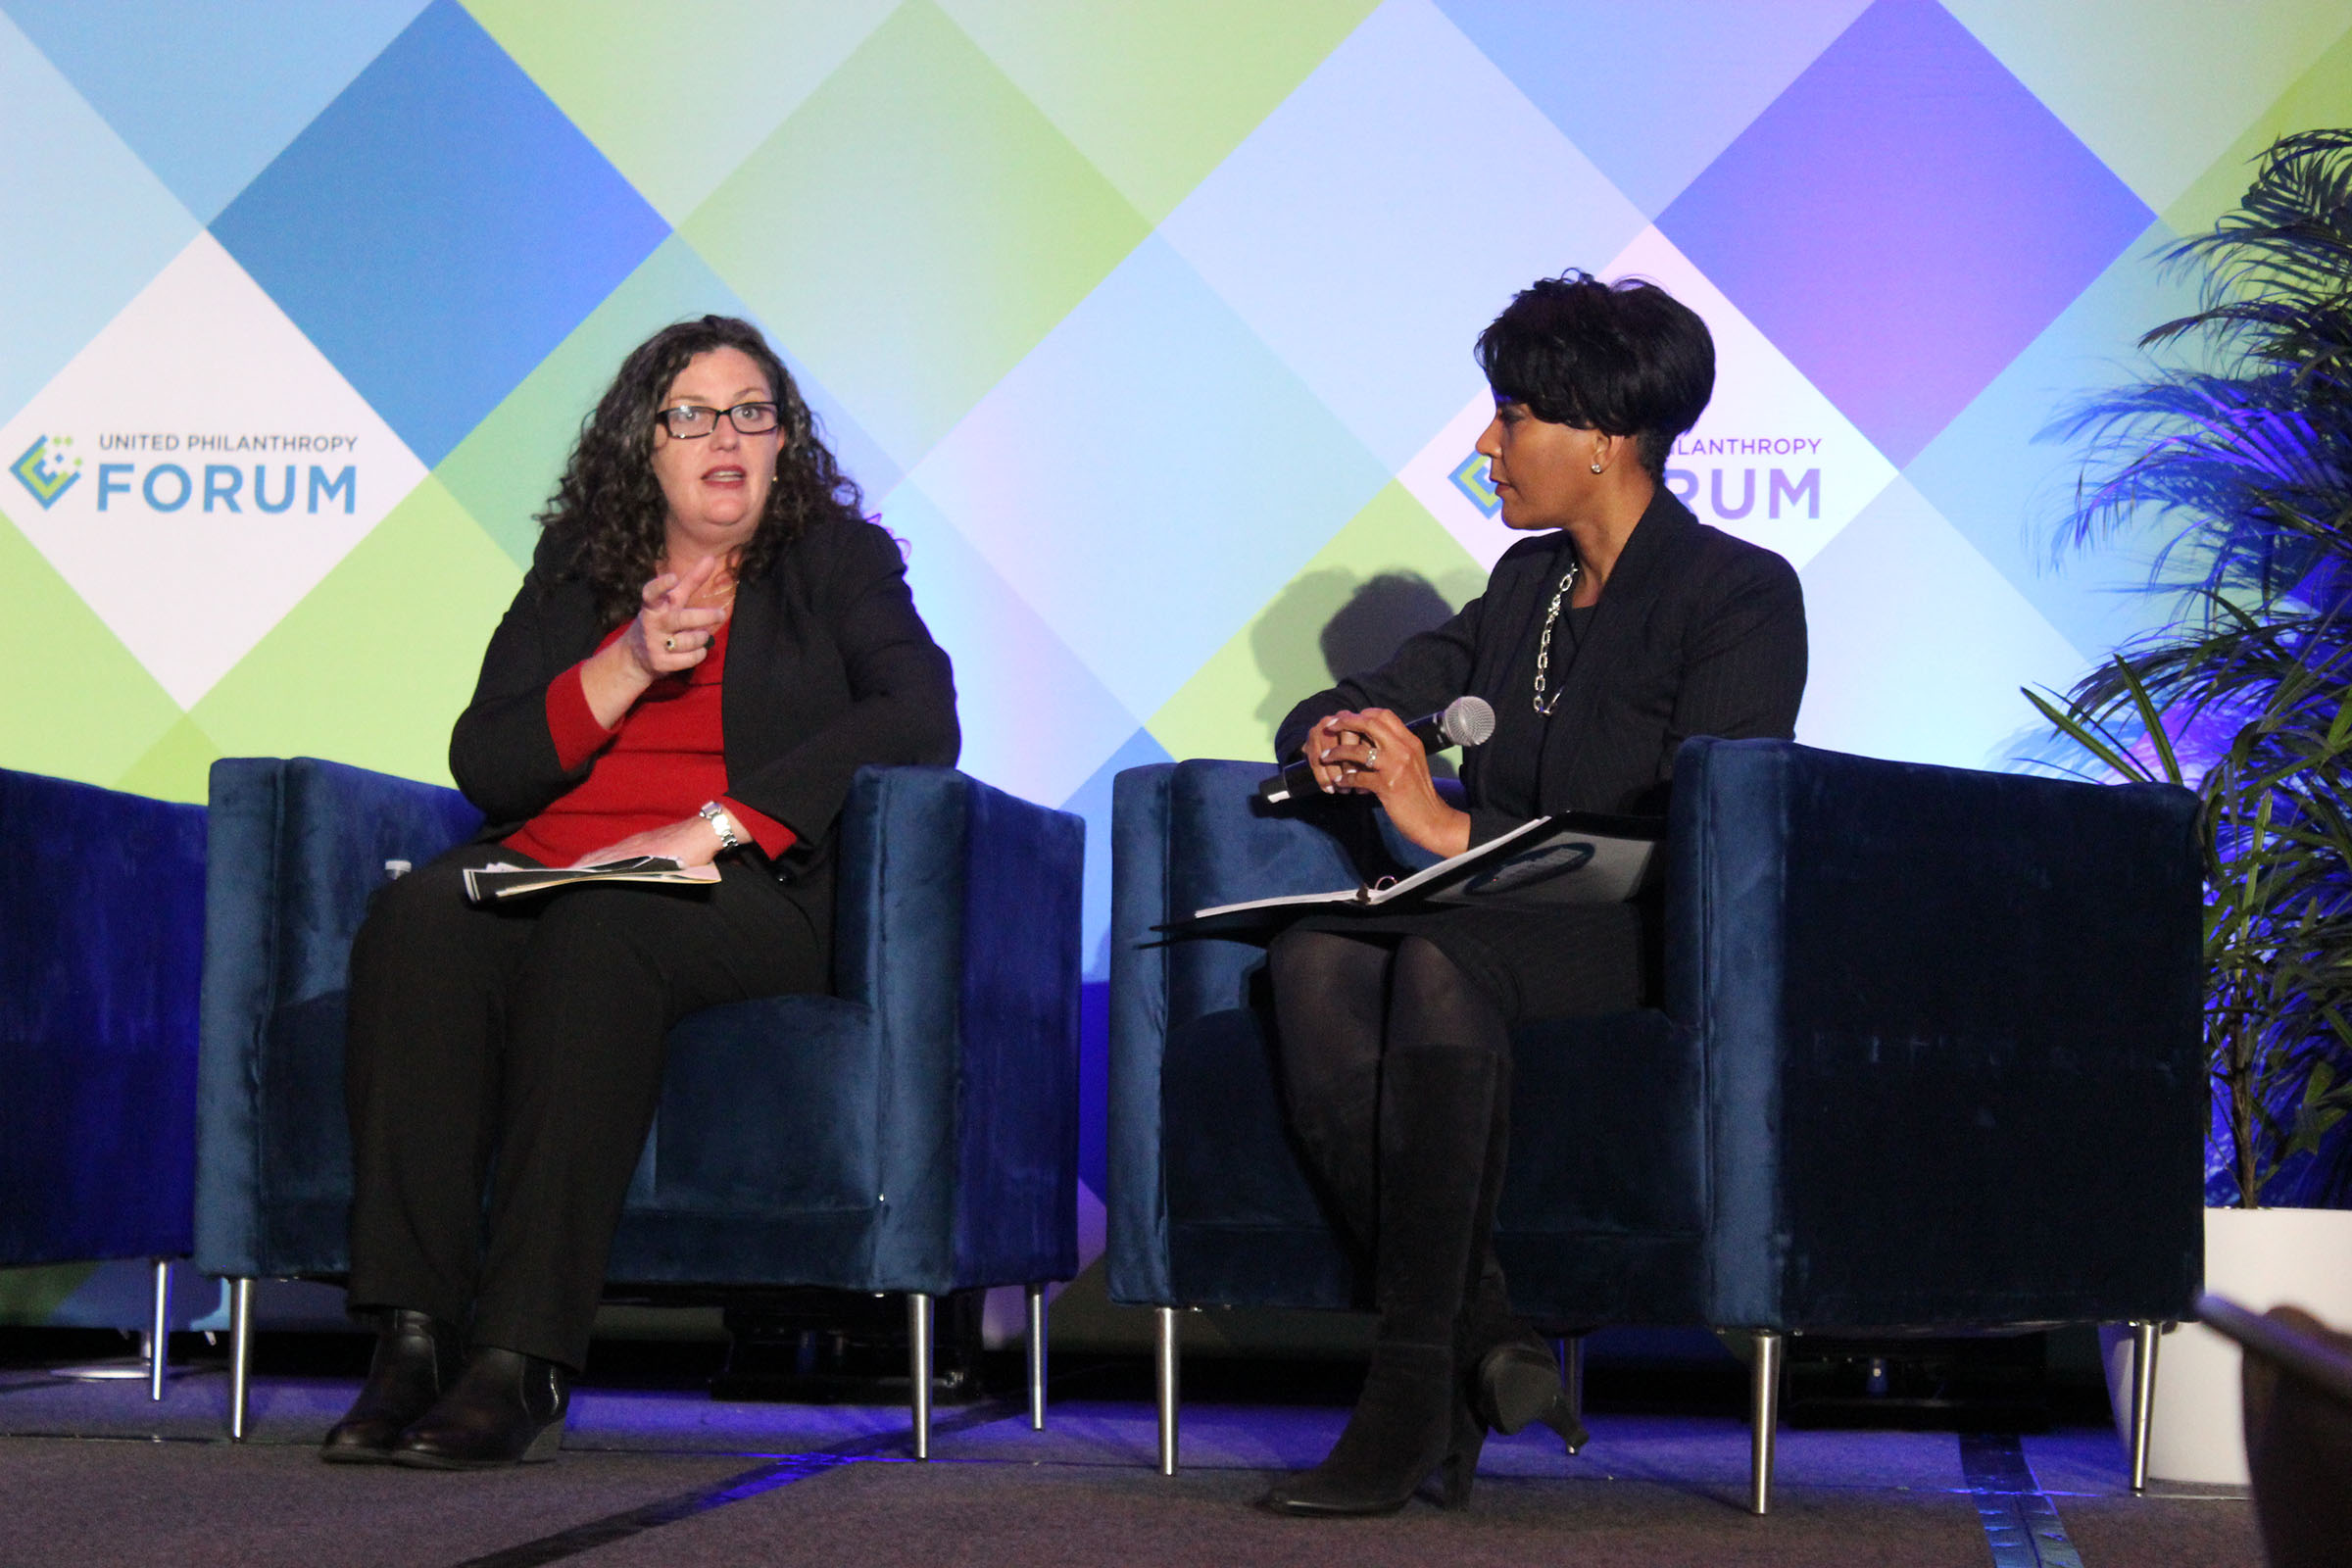 Kathleen Enright and Keisha Lance Bottoms chat during a panel